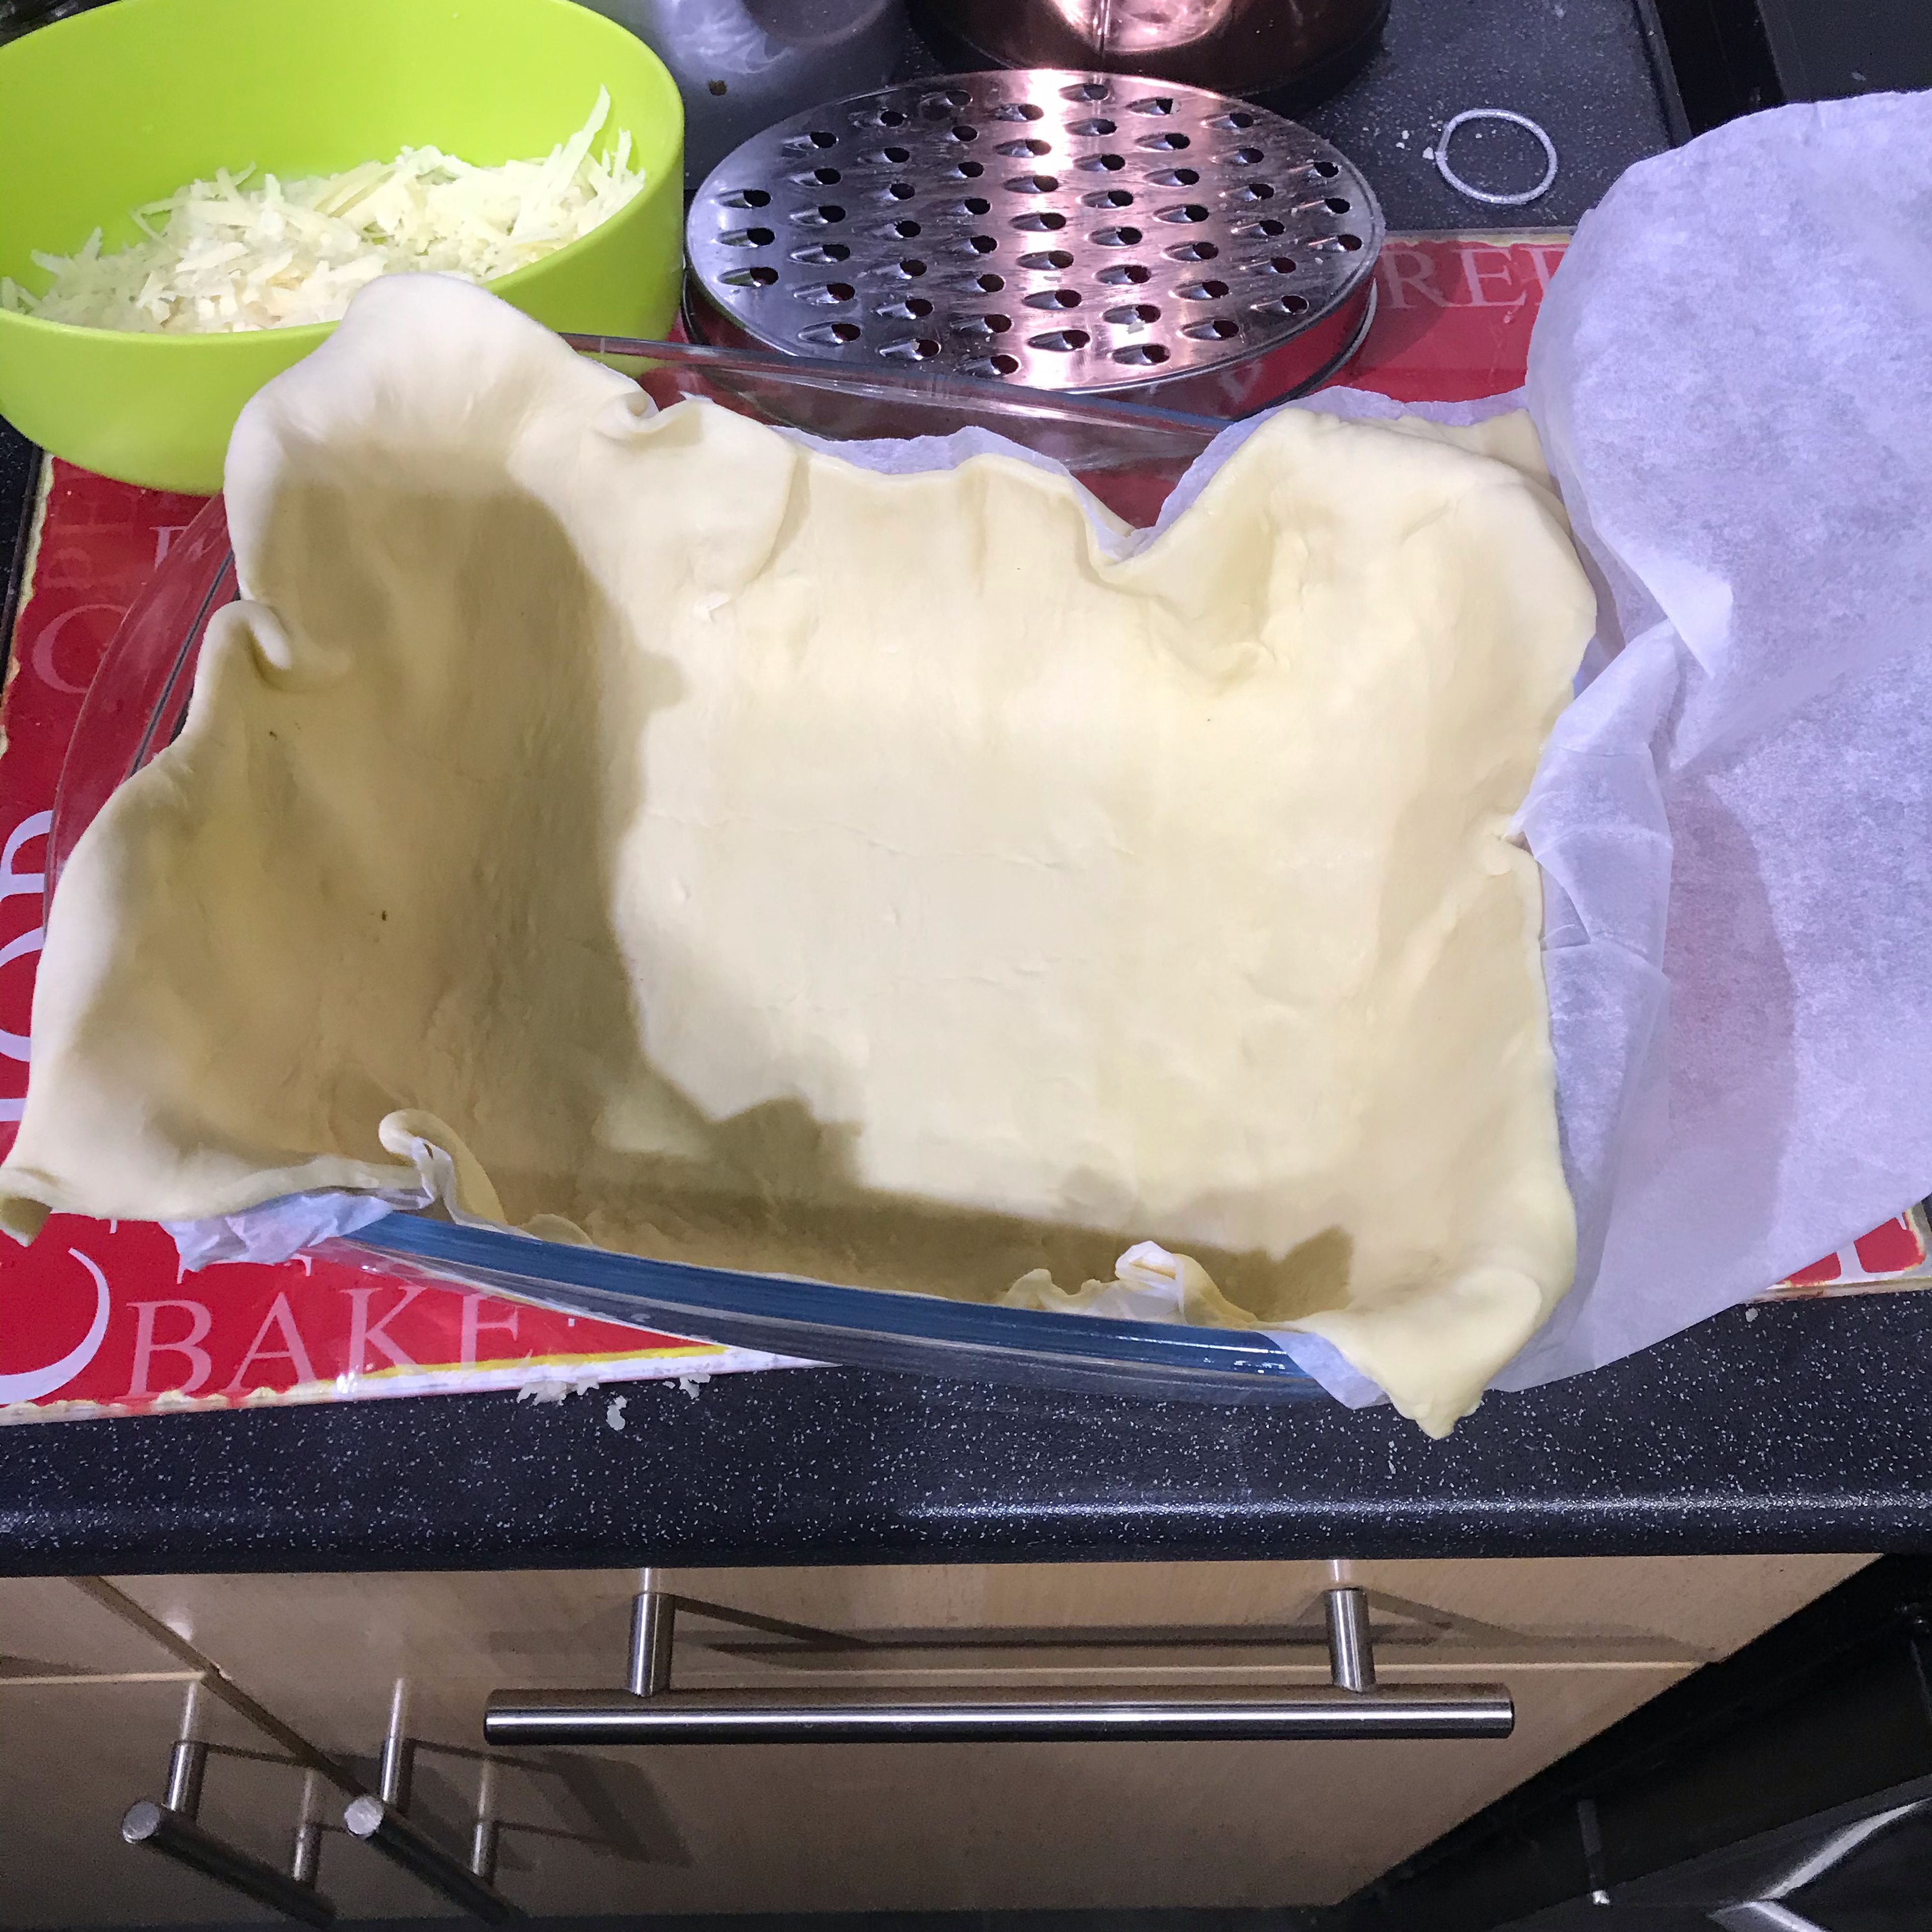 Put pastry into a baking dish